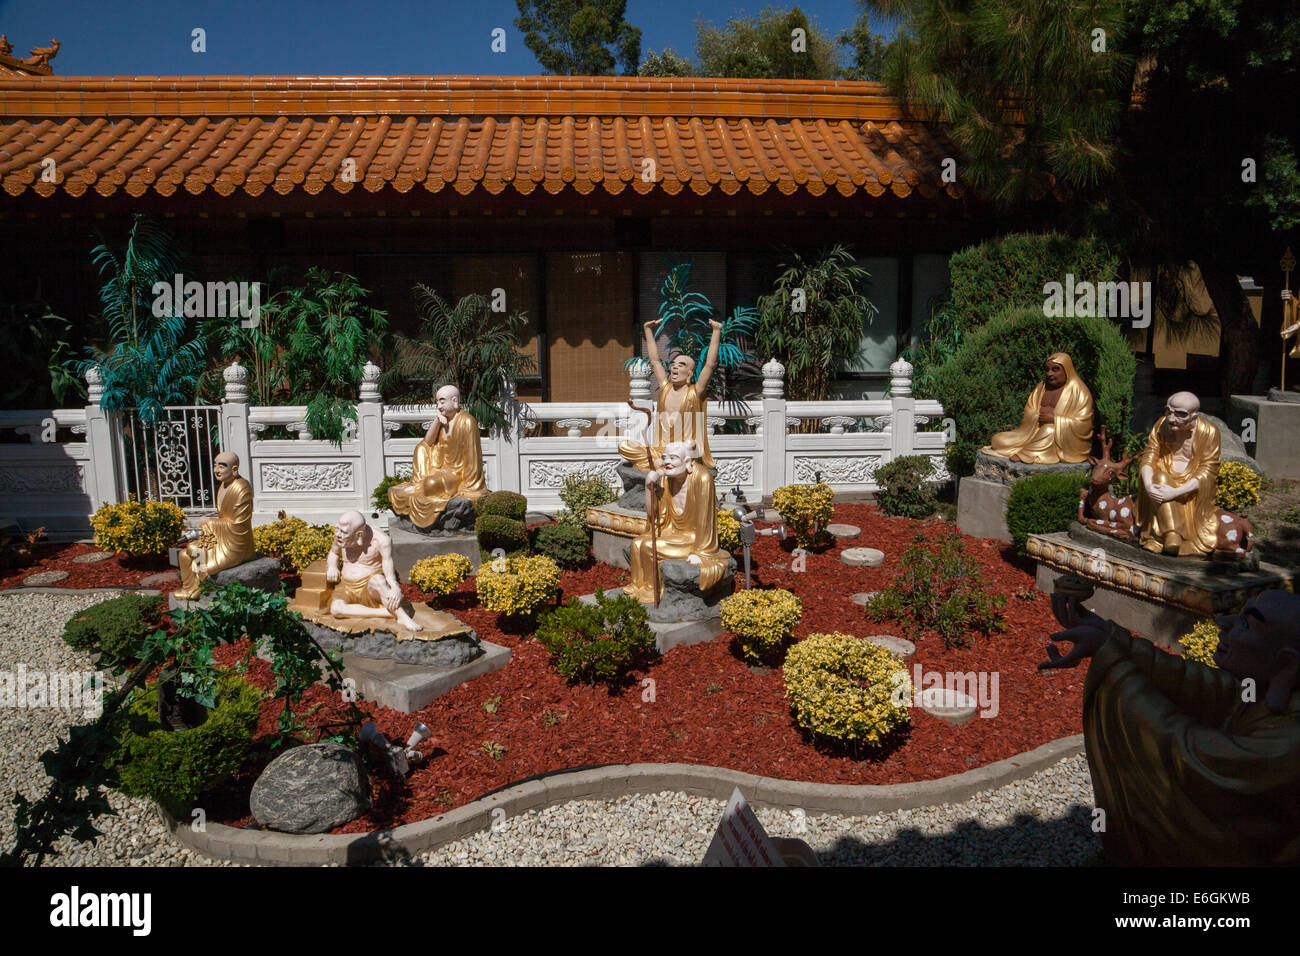 The Arhat Garden in Hsi Lai Buddhis temple; disciples of the Buddha, Hacienda Heights, California, USA Stock Photo